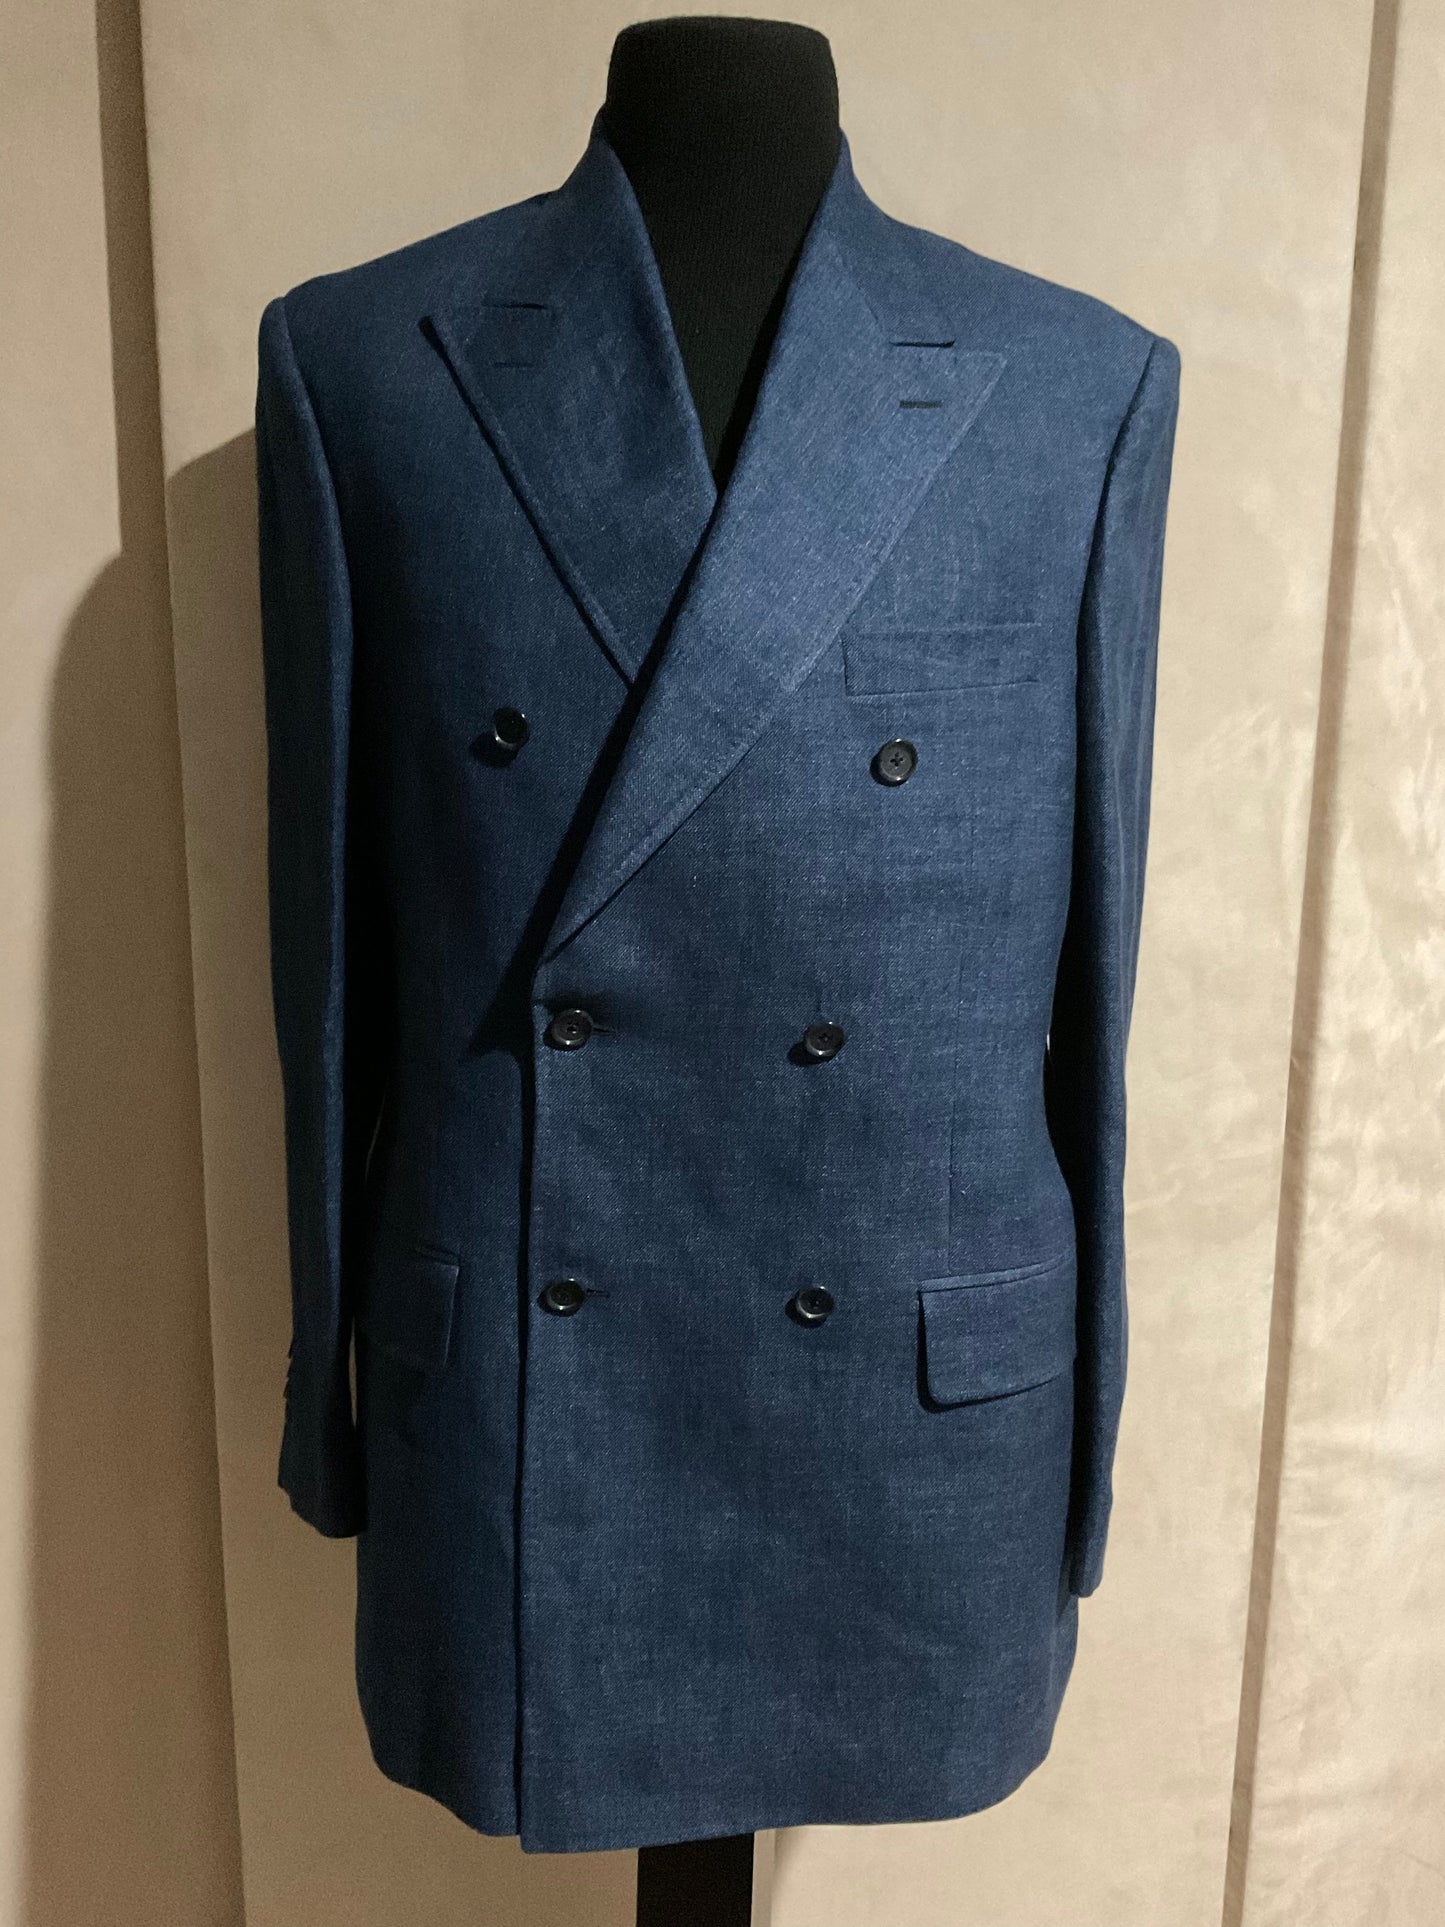 R P SPORT JACKET BLAZER / DOUBLE BREASTED / BLUE LINEN / 40 REG - LONG / NEW / MADE IN CANADA